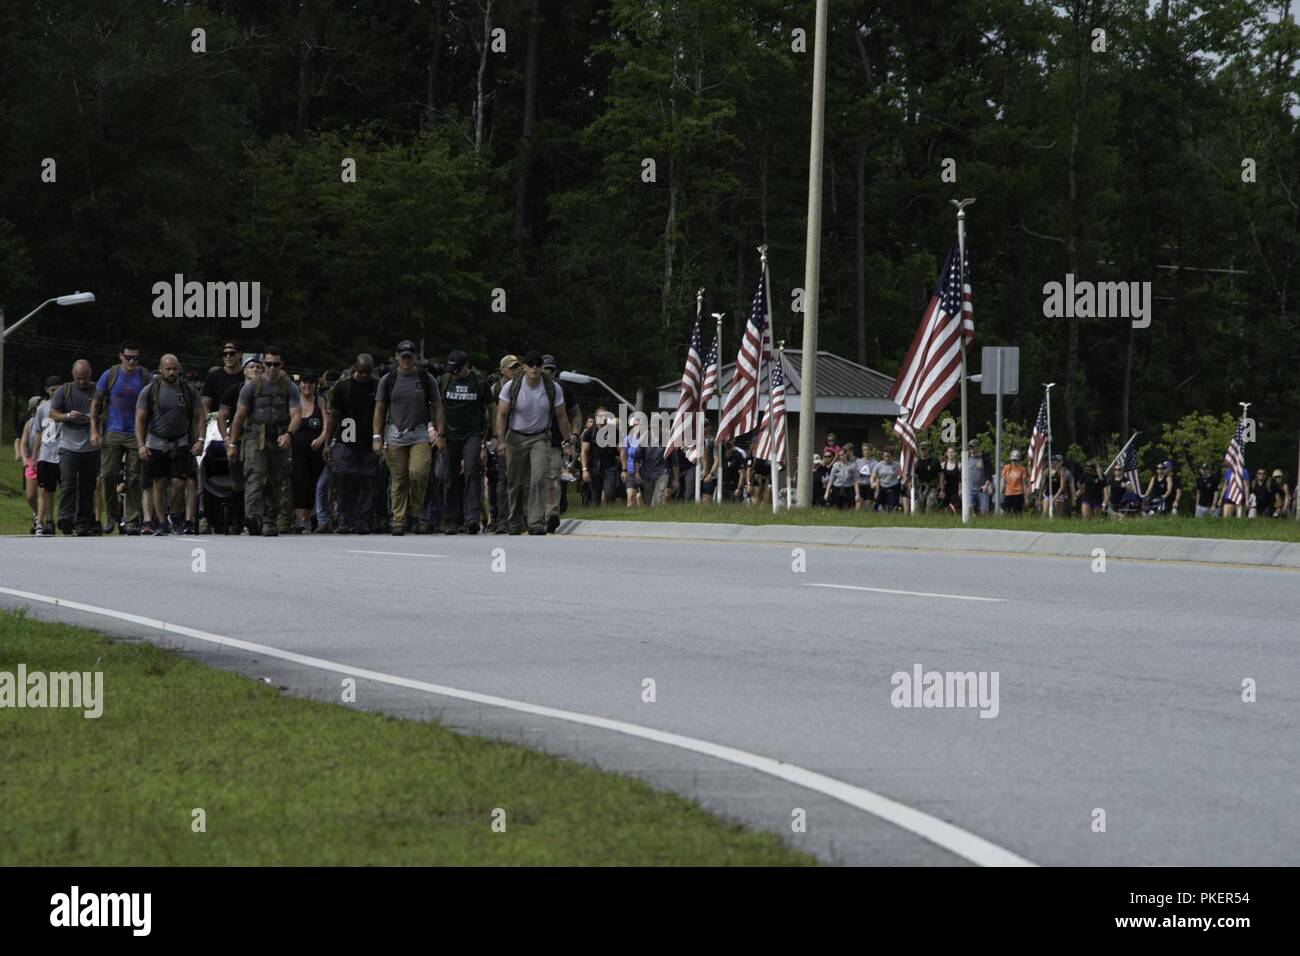 Service members and family and friends of the seven U.S. Marine Raiders and nine Marine Aviator crew members who died in the July, 2017, KC-130 crash in Laflore County, Miss., finish the last leg of their 900-mile memorial hike at Marine Corps Special Operations Command on Marine Corps Base Camp Lejeune, July 26. The hike started at the memorial site in Itta Bena, Mississippi, traveling 900-miles to Camp Lejeune. 10 teams took turns hiking a continuous 24 hours until reaching Stump Sound Park, but the final stretch finished at the MARSOC Compound on MCB Camp Lejeune. Stock Photo